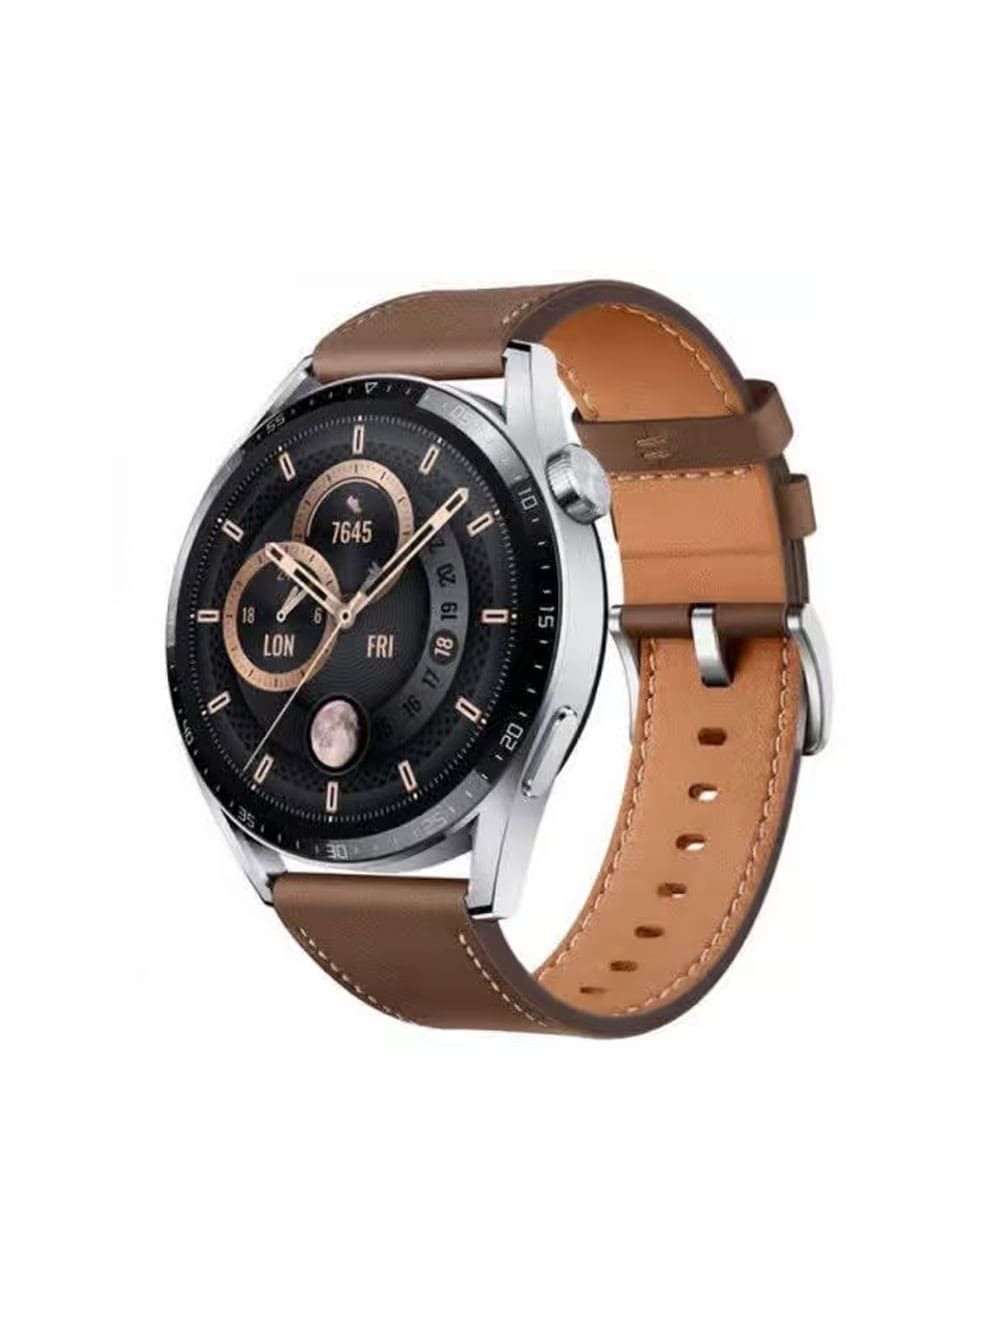 Huawei Watch GT2, 46mm Stainless Steel, Leather Strap, Brown - eXtra Saudi